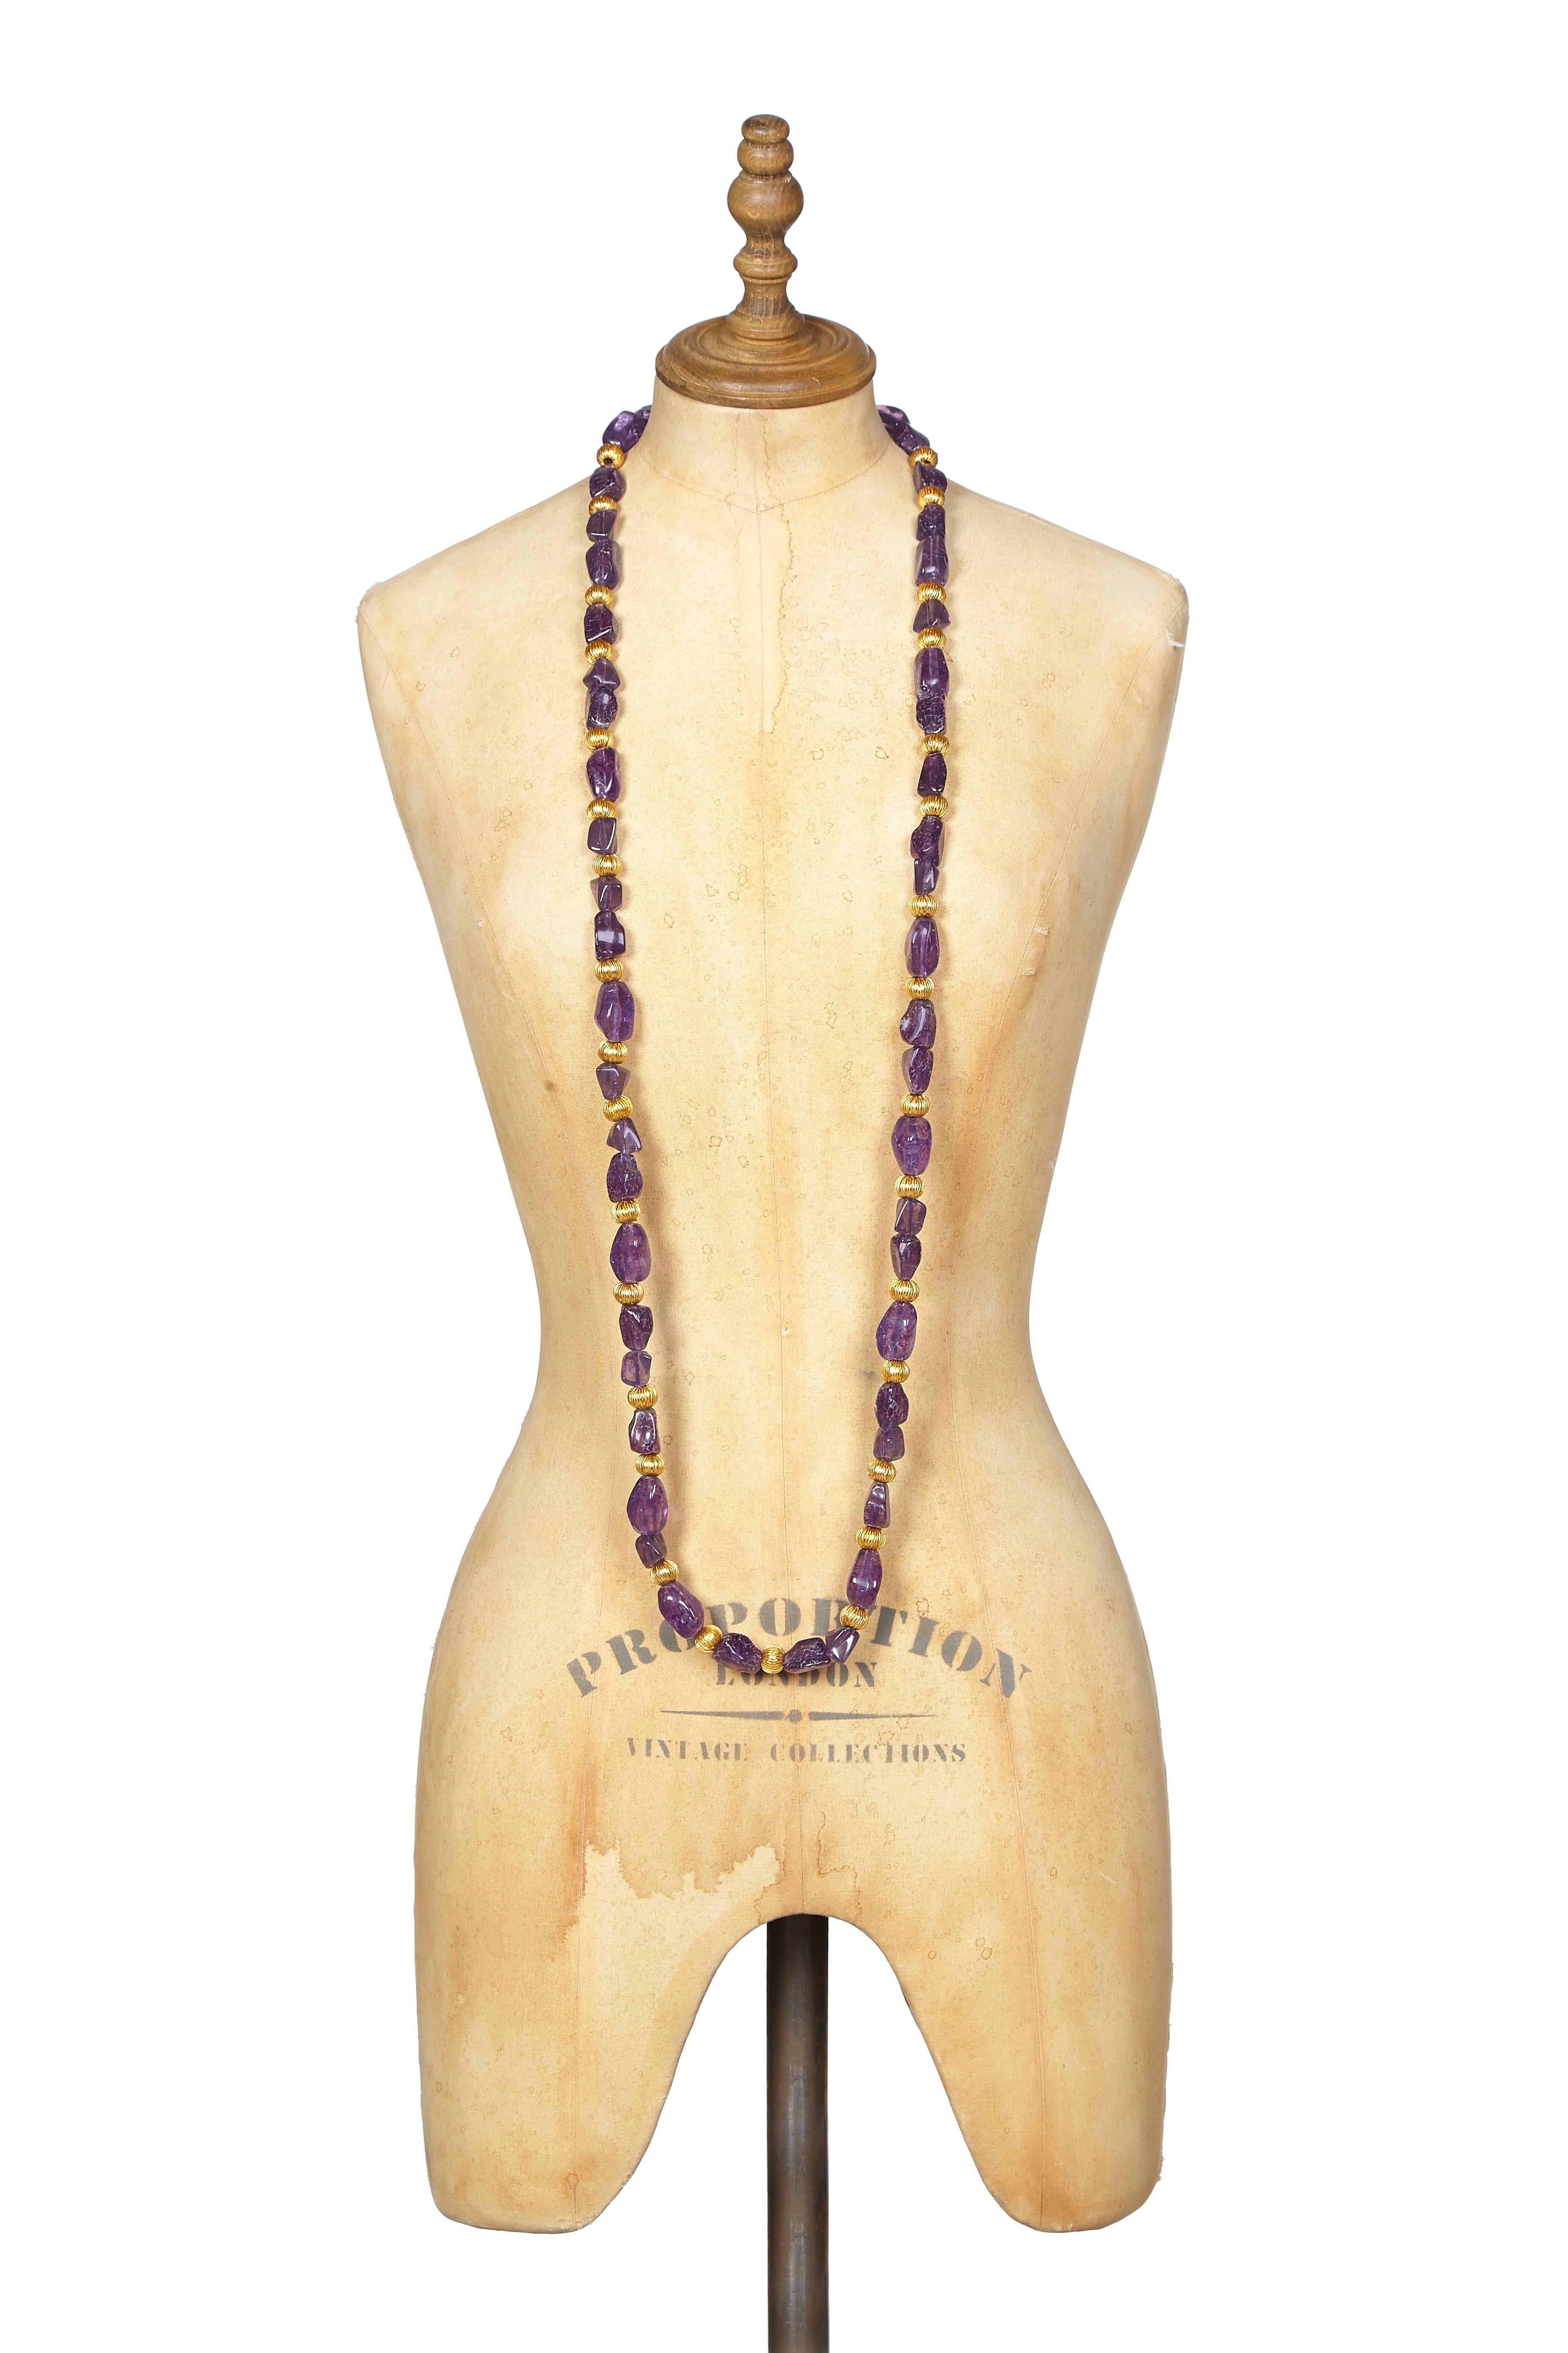 Women's Chanel 1990s Faux Amethyst Necklace / Belt with Gold Gilt Beads & Tassel Detail